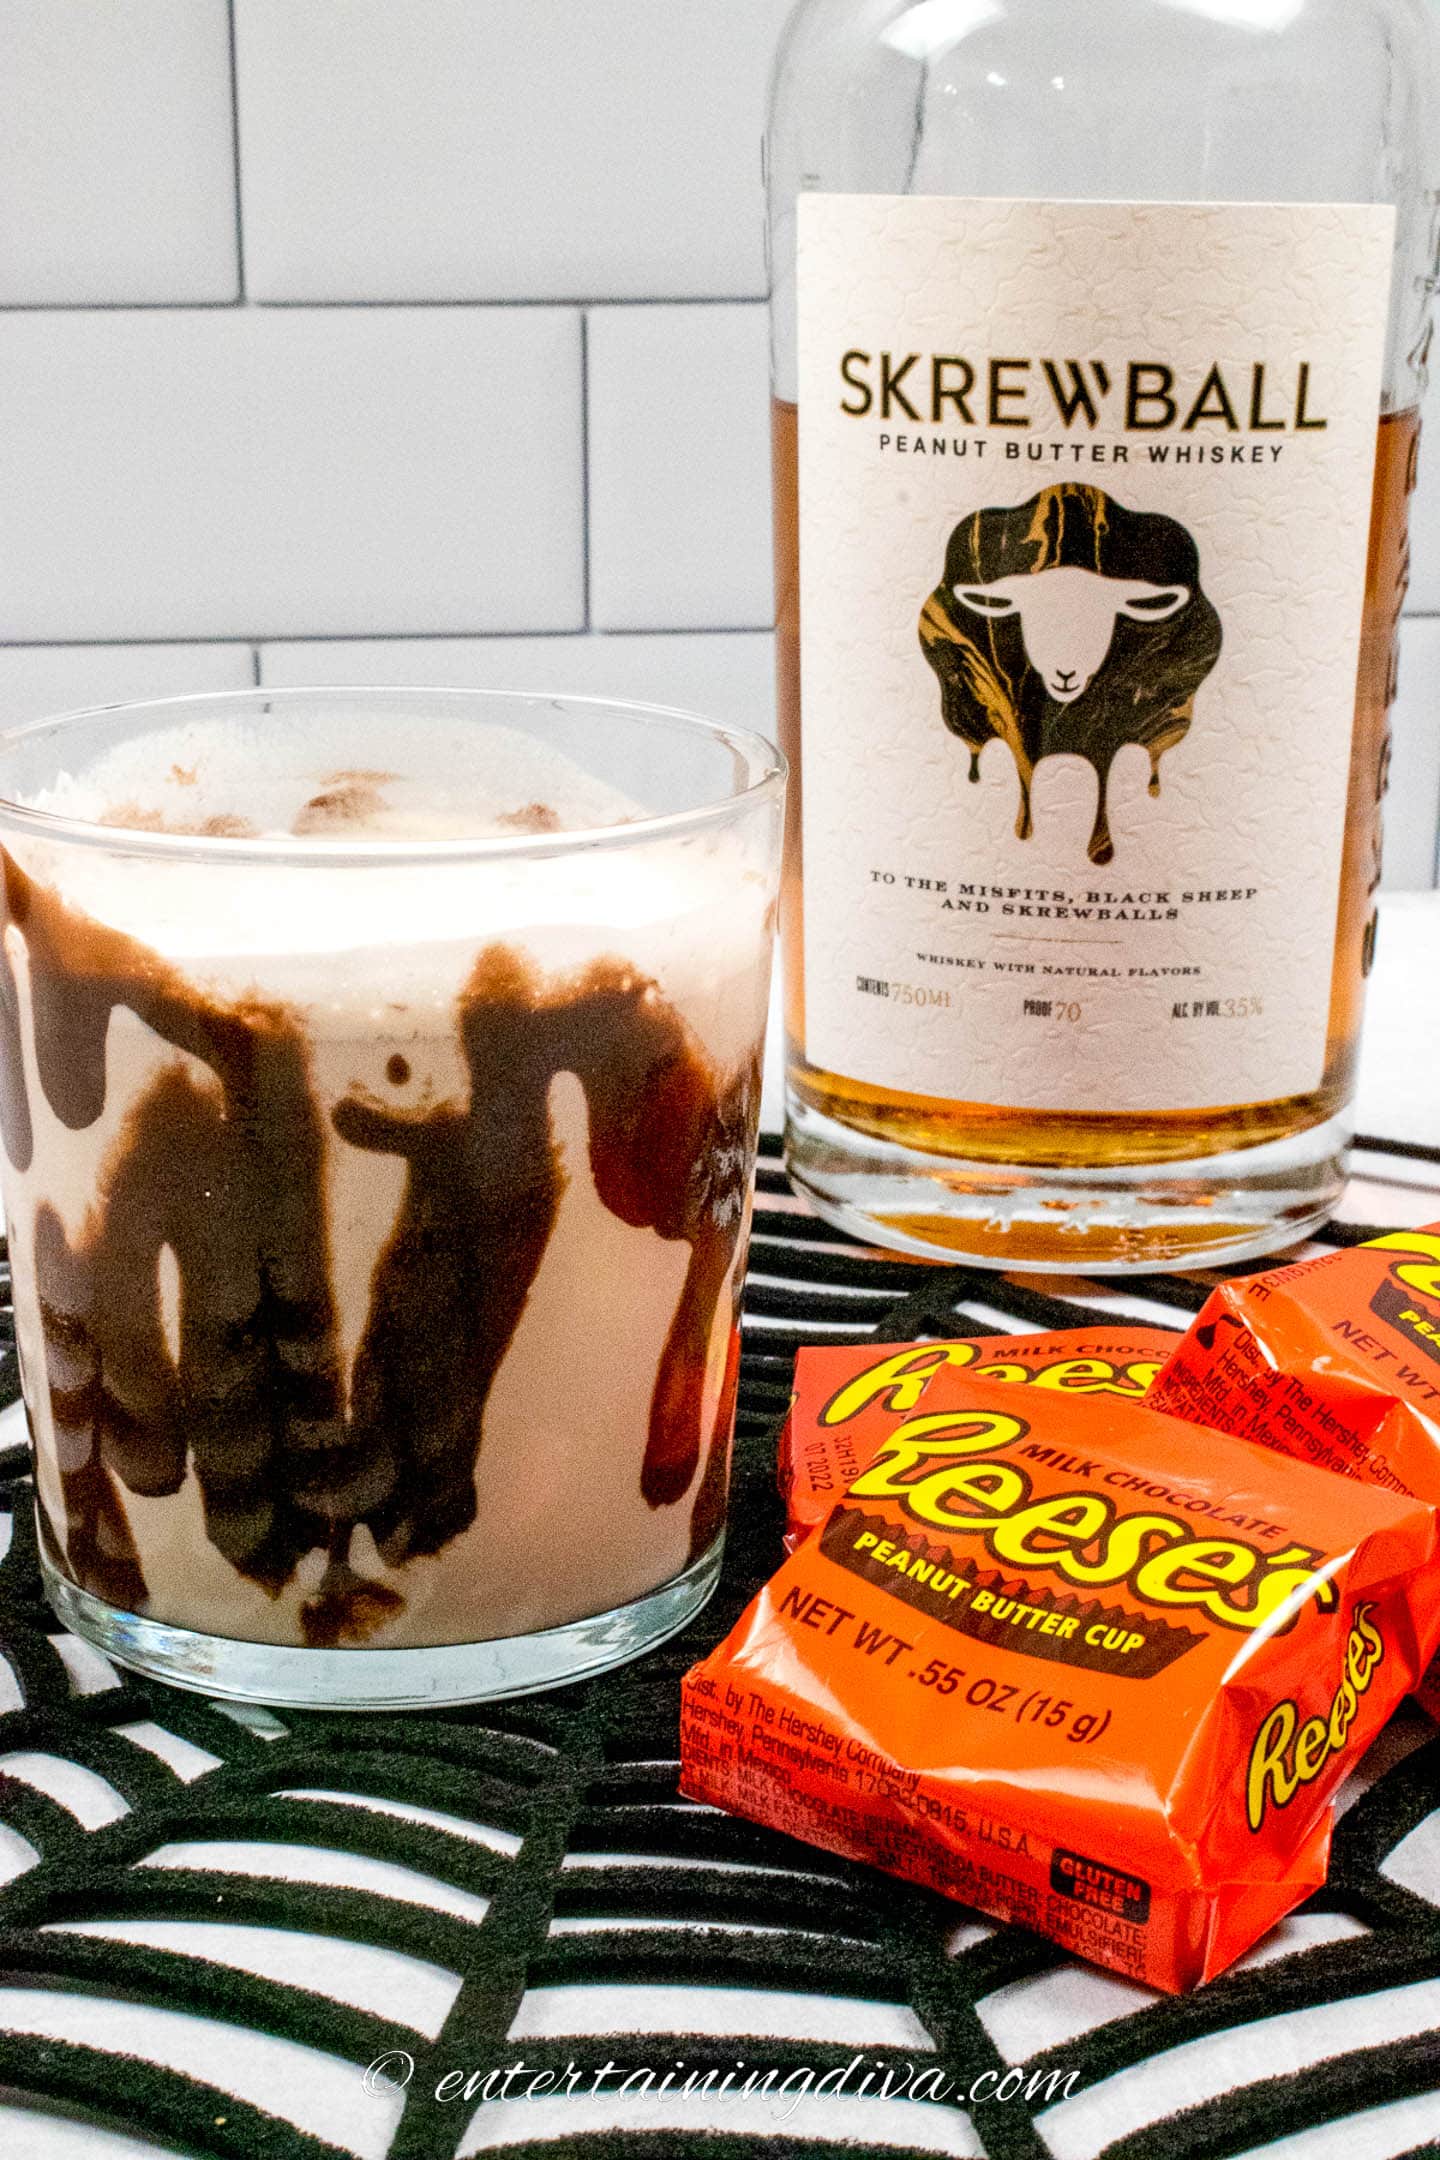 Peanut butter cup cocktail on a black spider web beside some Reese's peanut butter cups and a bottle of Skrewball whiskey